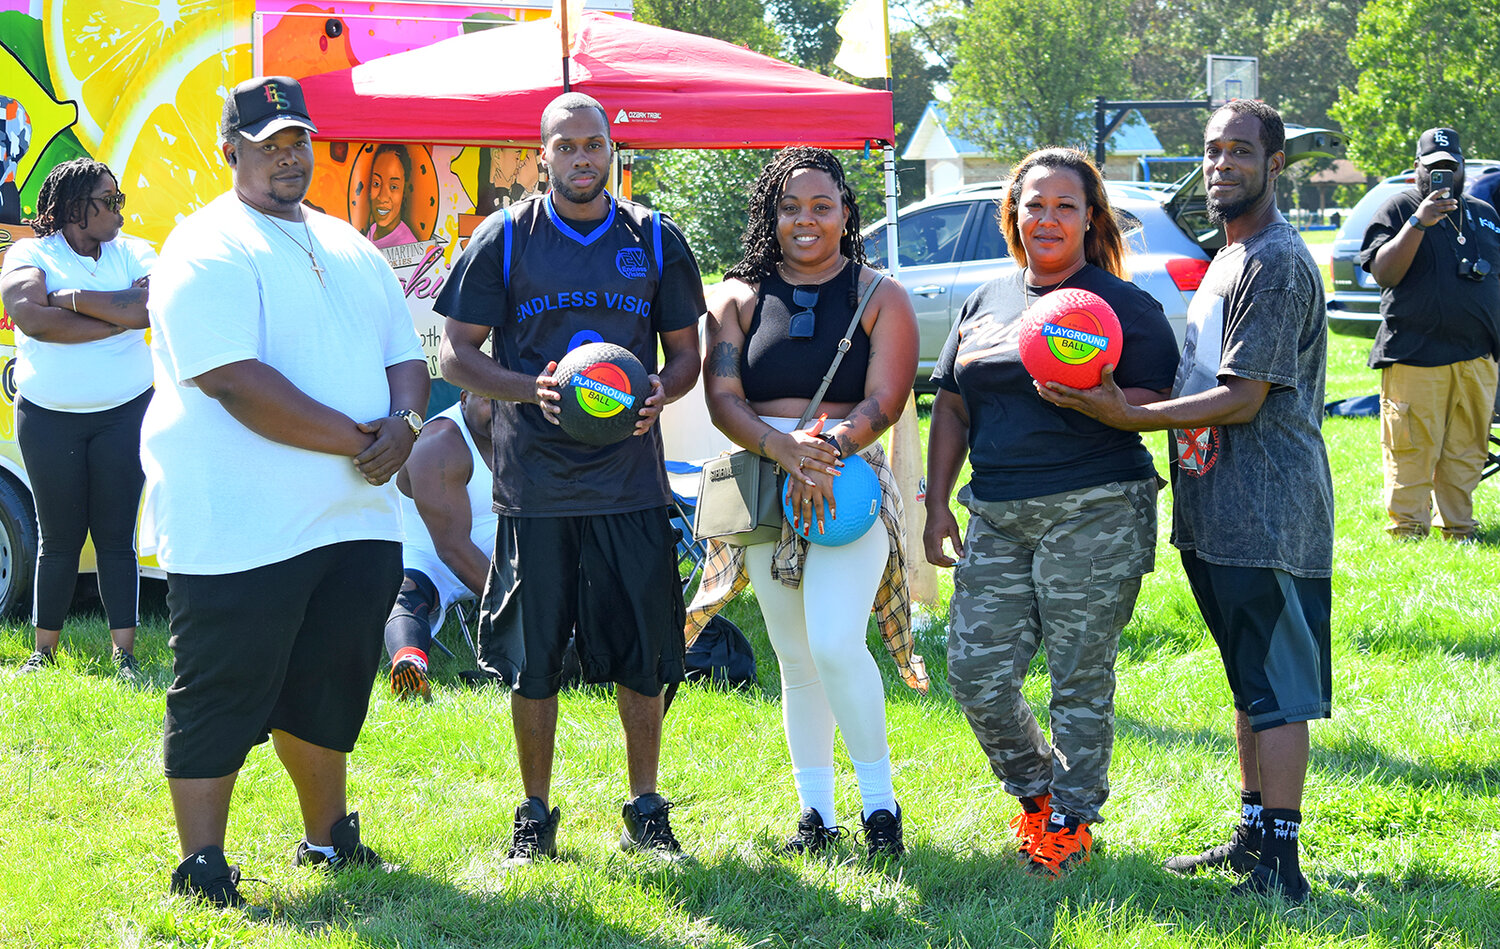 A friendly Cambridge vs. Easton kickball game got underway in the Talbot town early Sunday afternoon. The event was planned as  a way to bring the two communities together. Organizers were, from the left, DJ Marshall Bradley, Bobby Johnson, Teasha Macer, Tyzann Meekins and Davontae Baker.